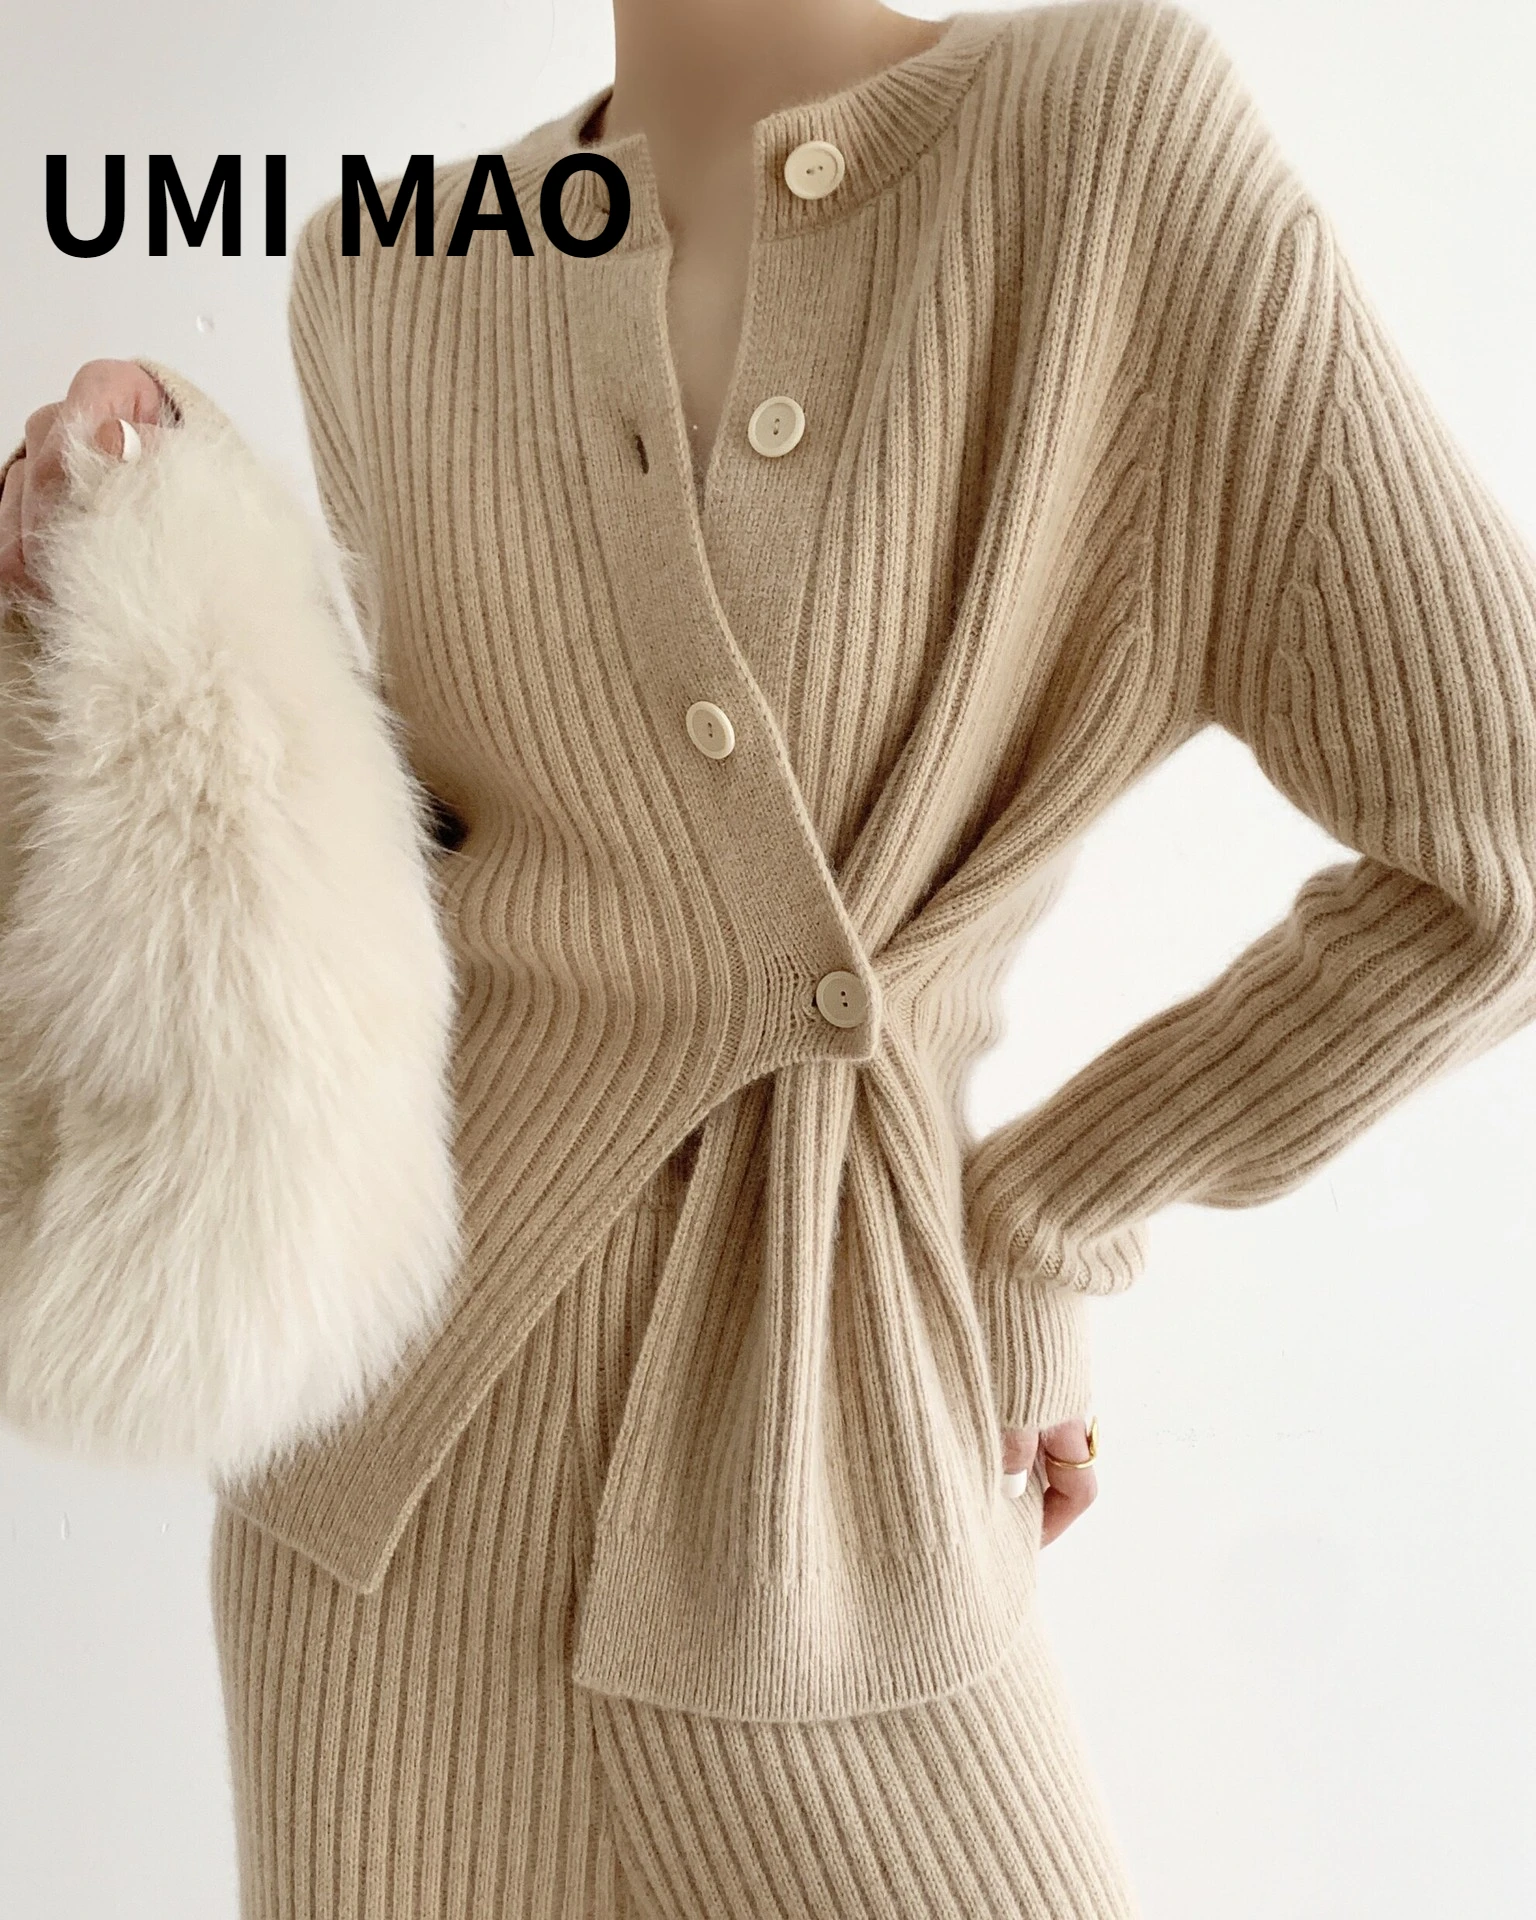 UMI MAO 2022 Autumn And Winter New Knitted Suit Women's Niche Design Fashion Slim Sweater Cardigan Wide-leg Pants Two-piece Set